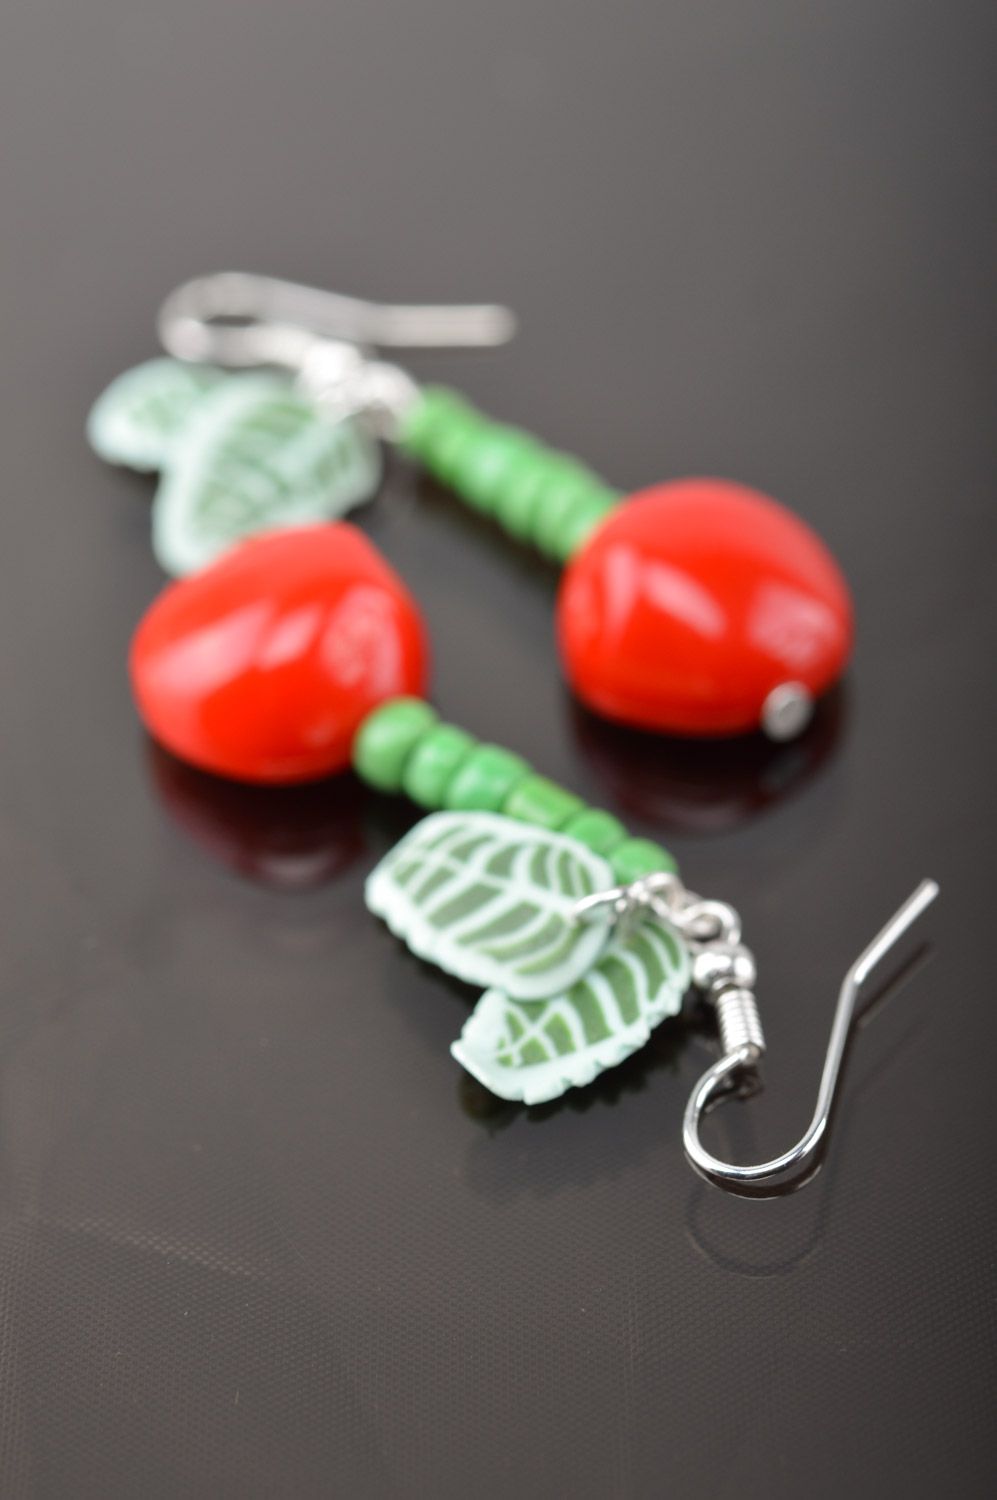 Homemade long polymer clay earrings with charms in the shape of cherries photo 4